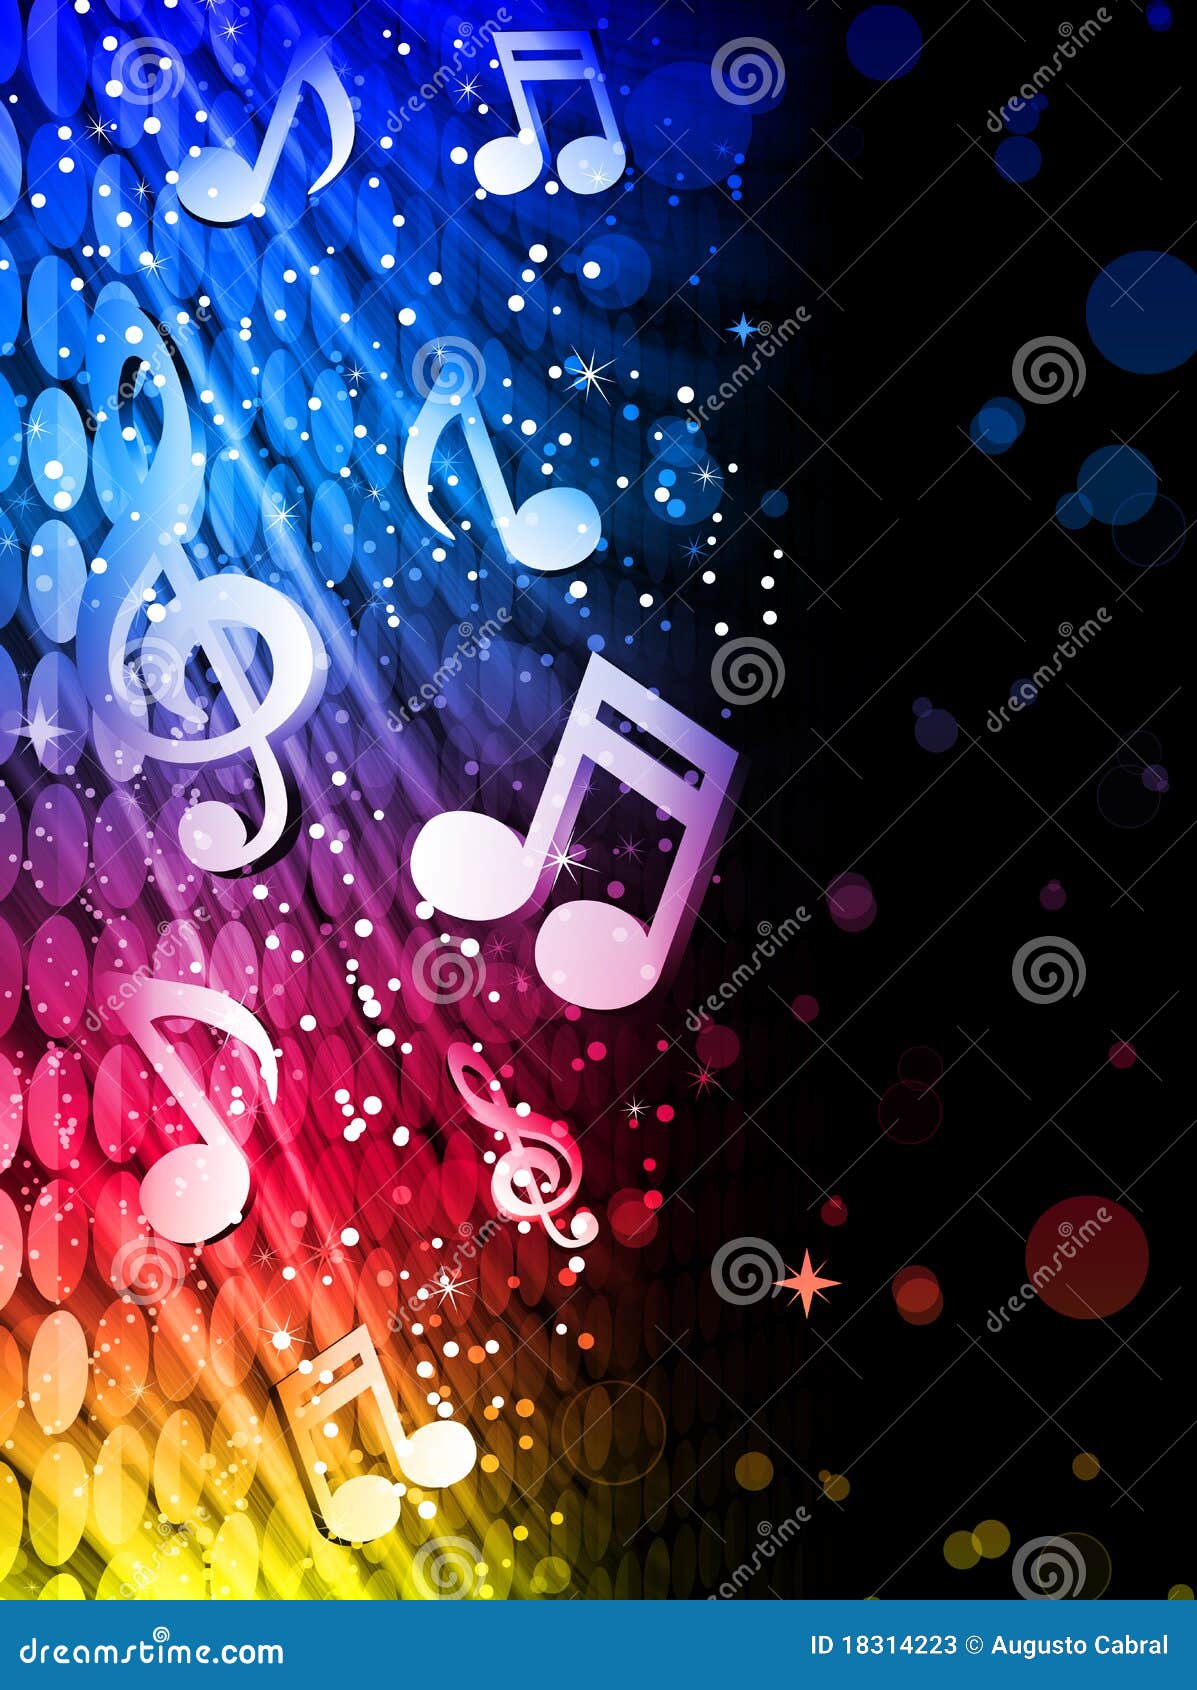 Party Colorful Waves Background with Music Notes Stock Vector -  Illustration of energy, color: 18314223